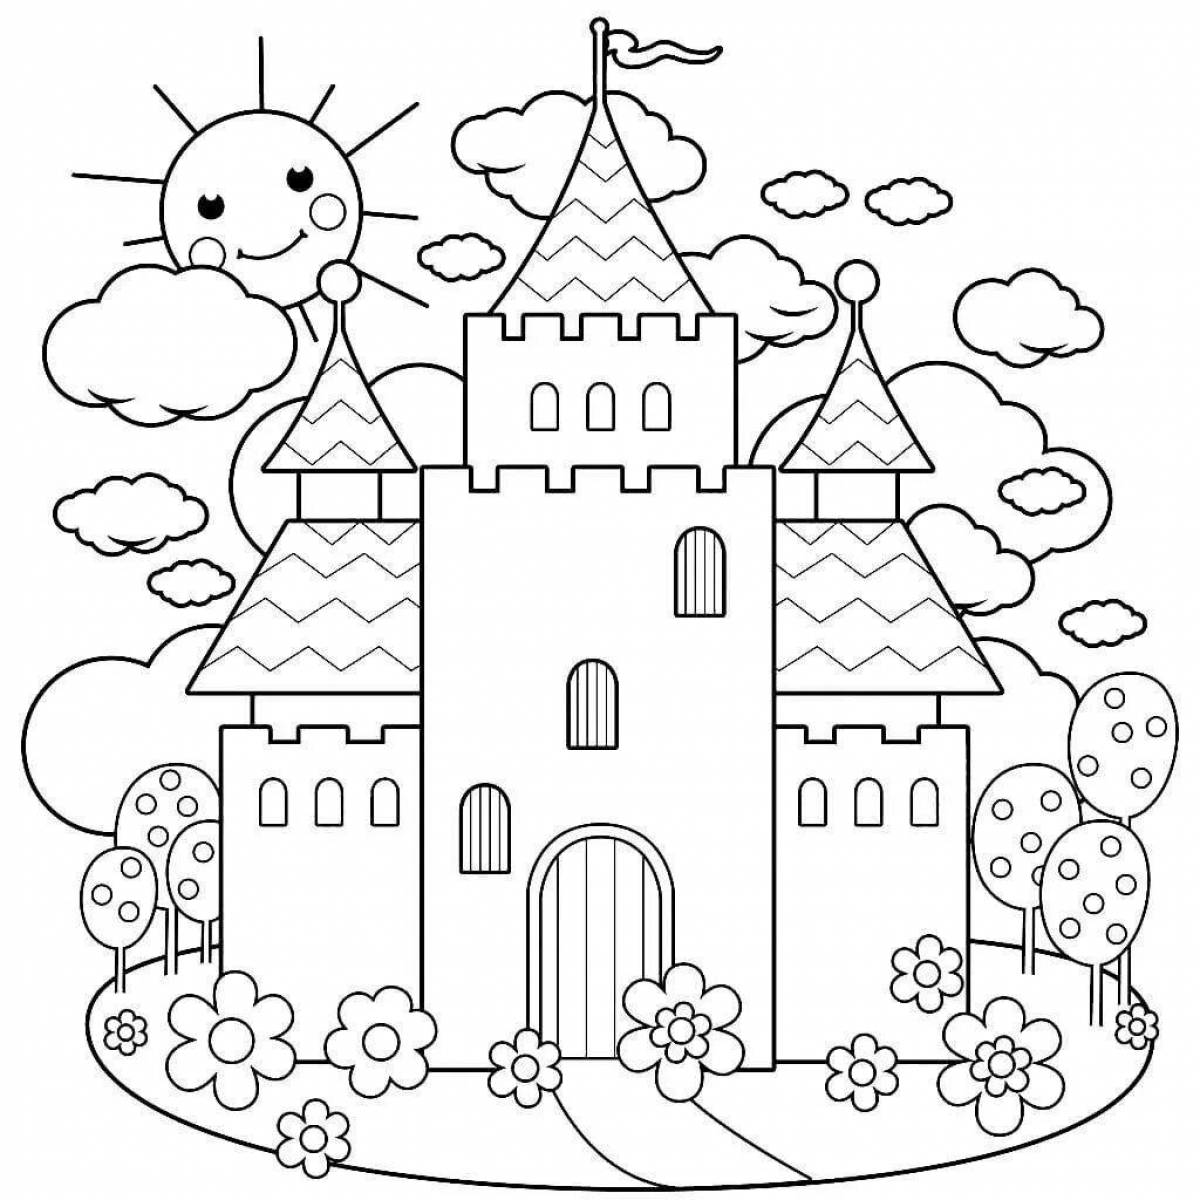 Coloring book happy palace for kids